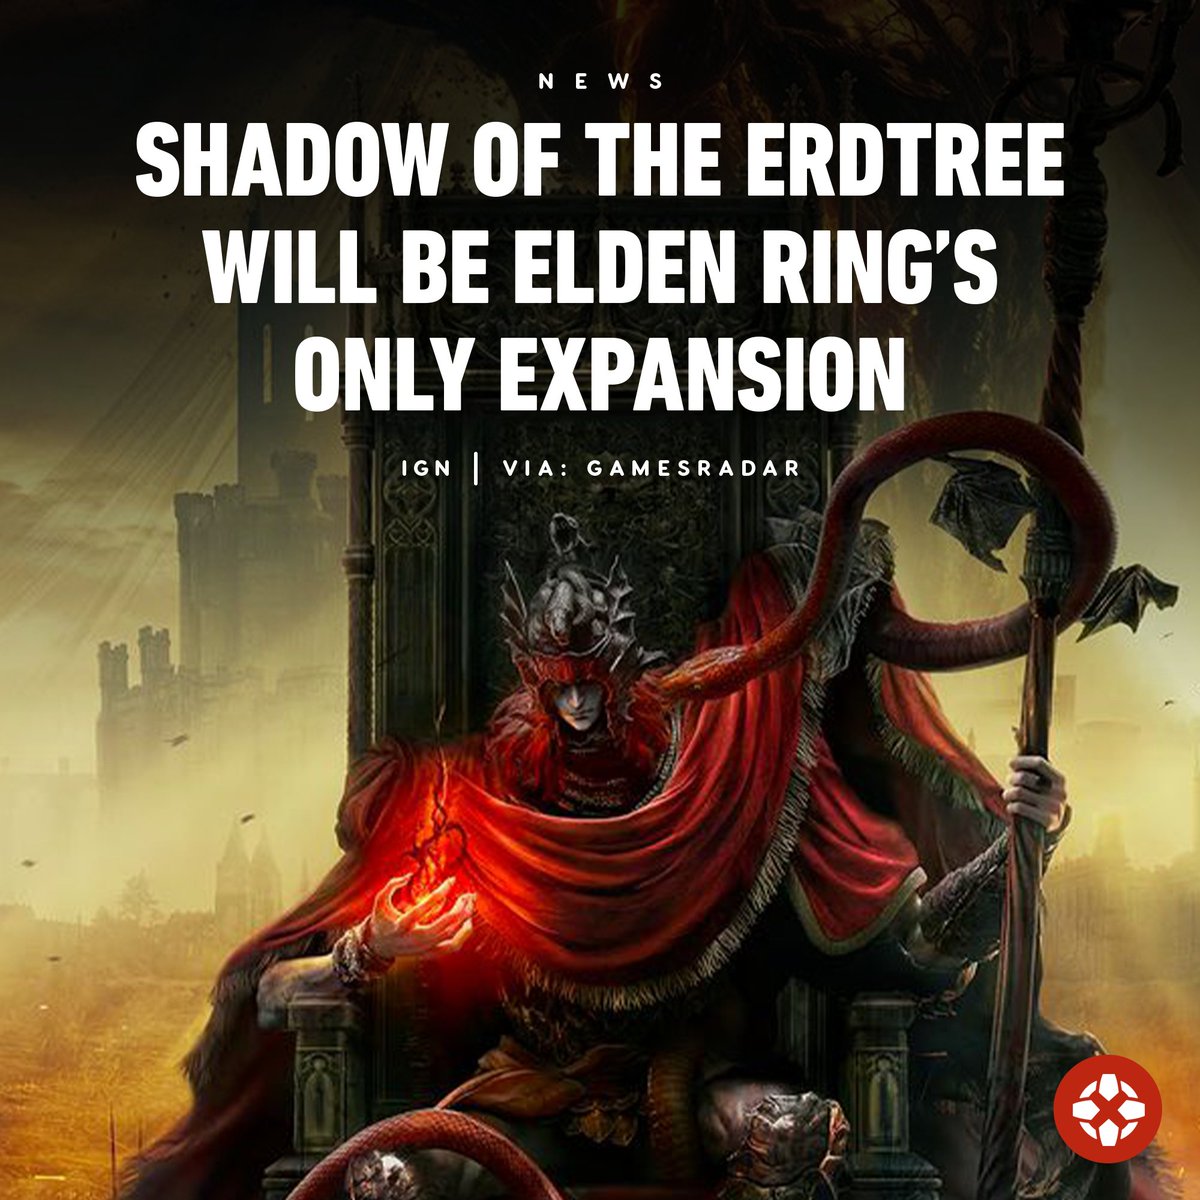 '[Shadow of the Erdtree] is the first and last DLC, and we have no plans to add more content to Elden Ring,' FromSoftware's Hidetaka Miyazaki said, via machine translation in a recent interview. bit.ly/3JJXFpi